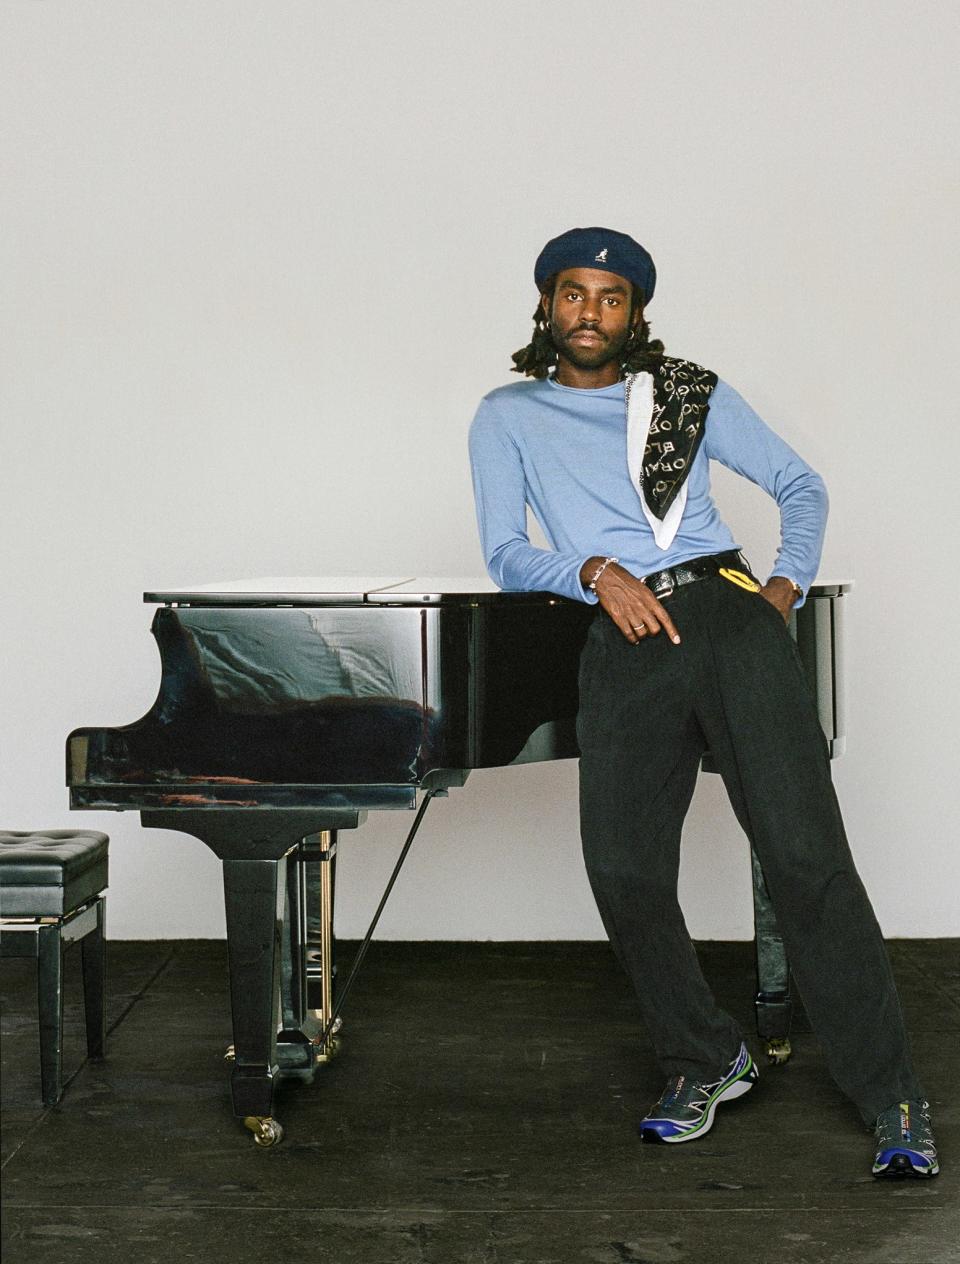 Although Dev Hynes surrounds himself with creative co-conspirators on his albums, “my ultimate goal,” he says, “is
to appease me.”